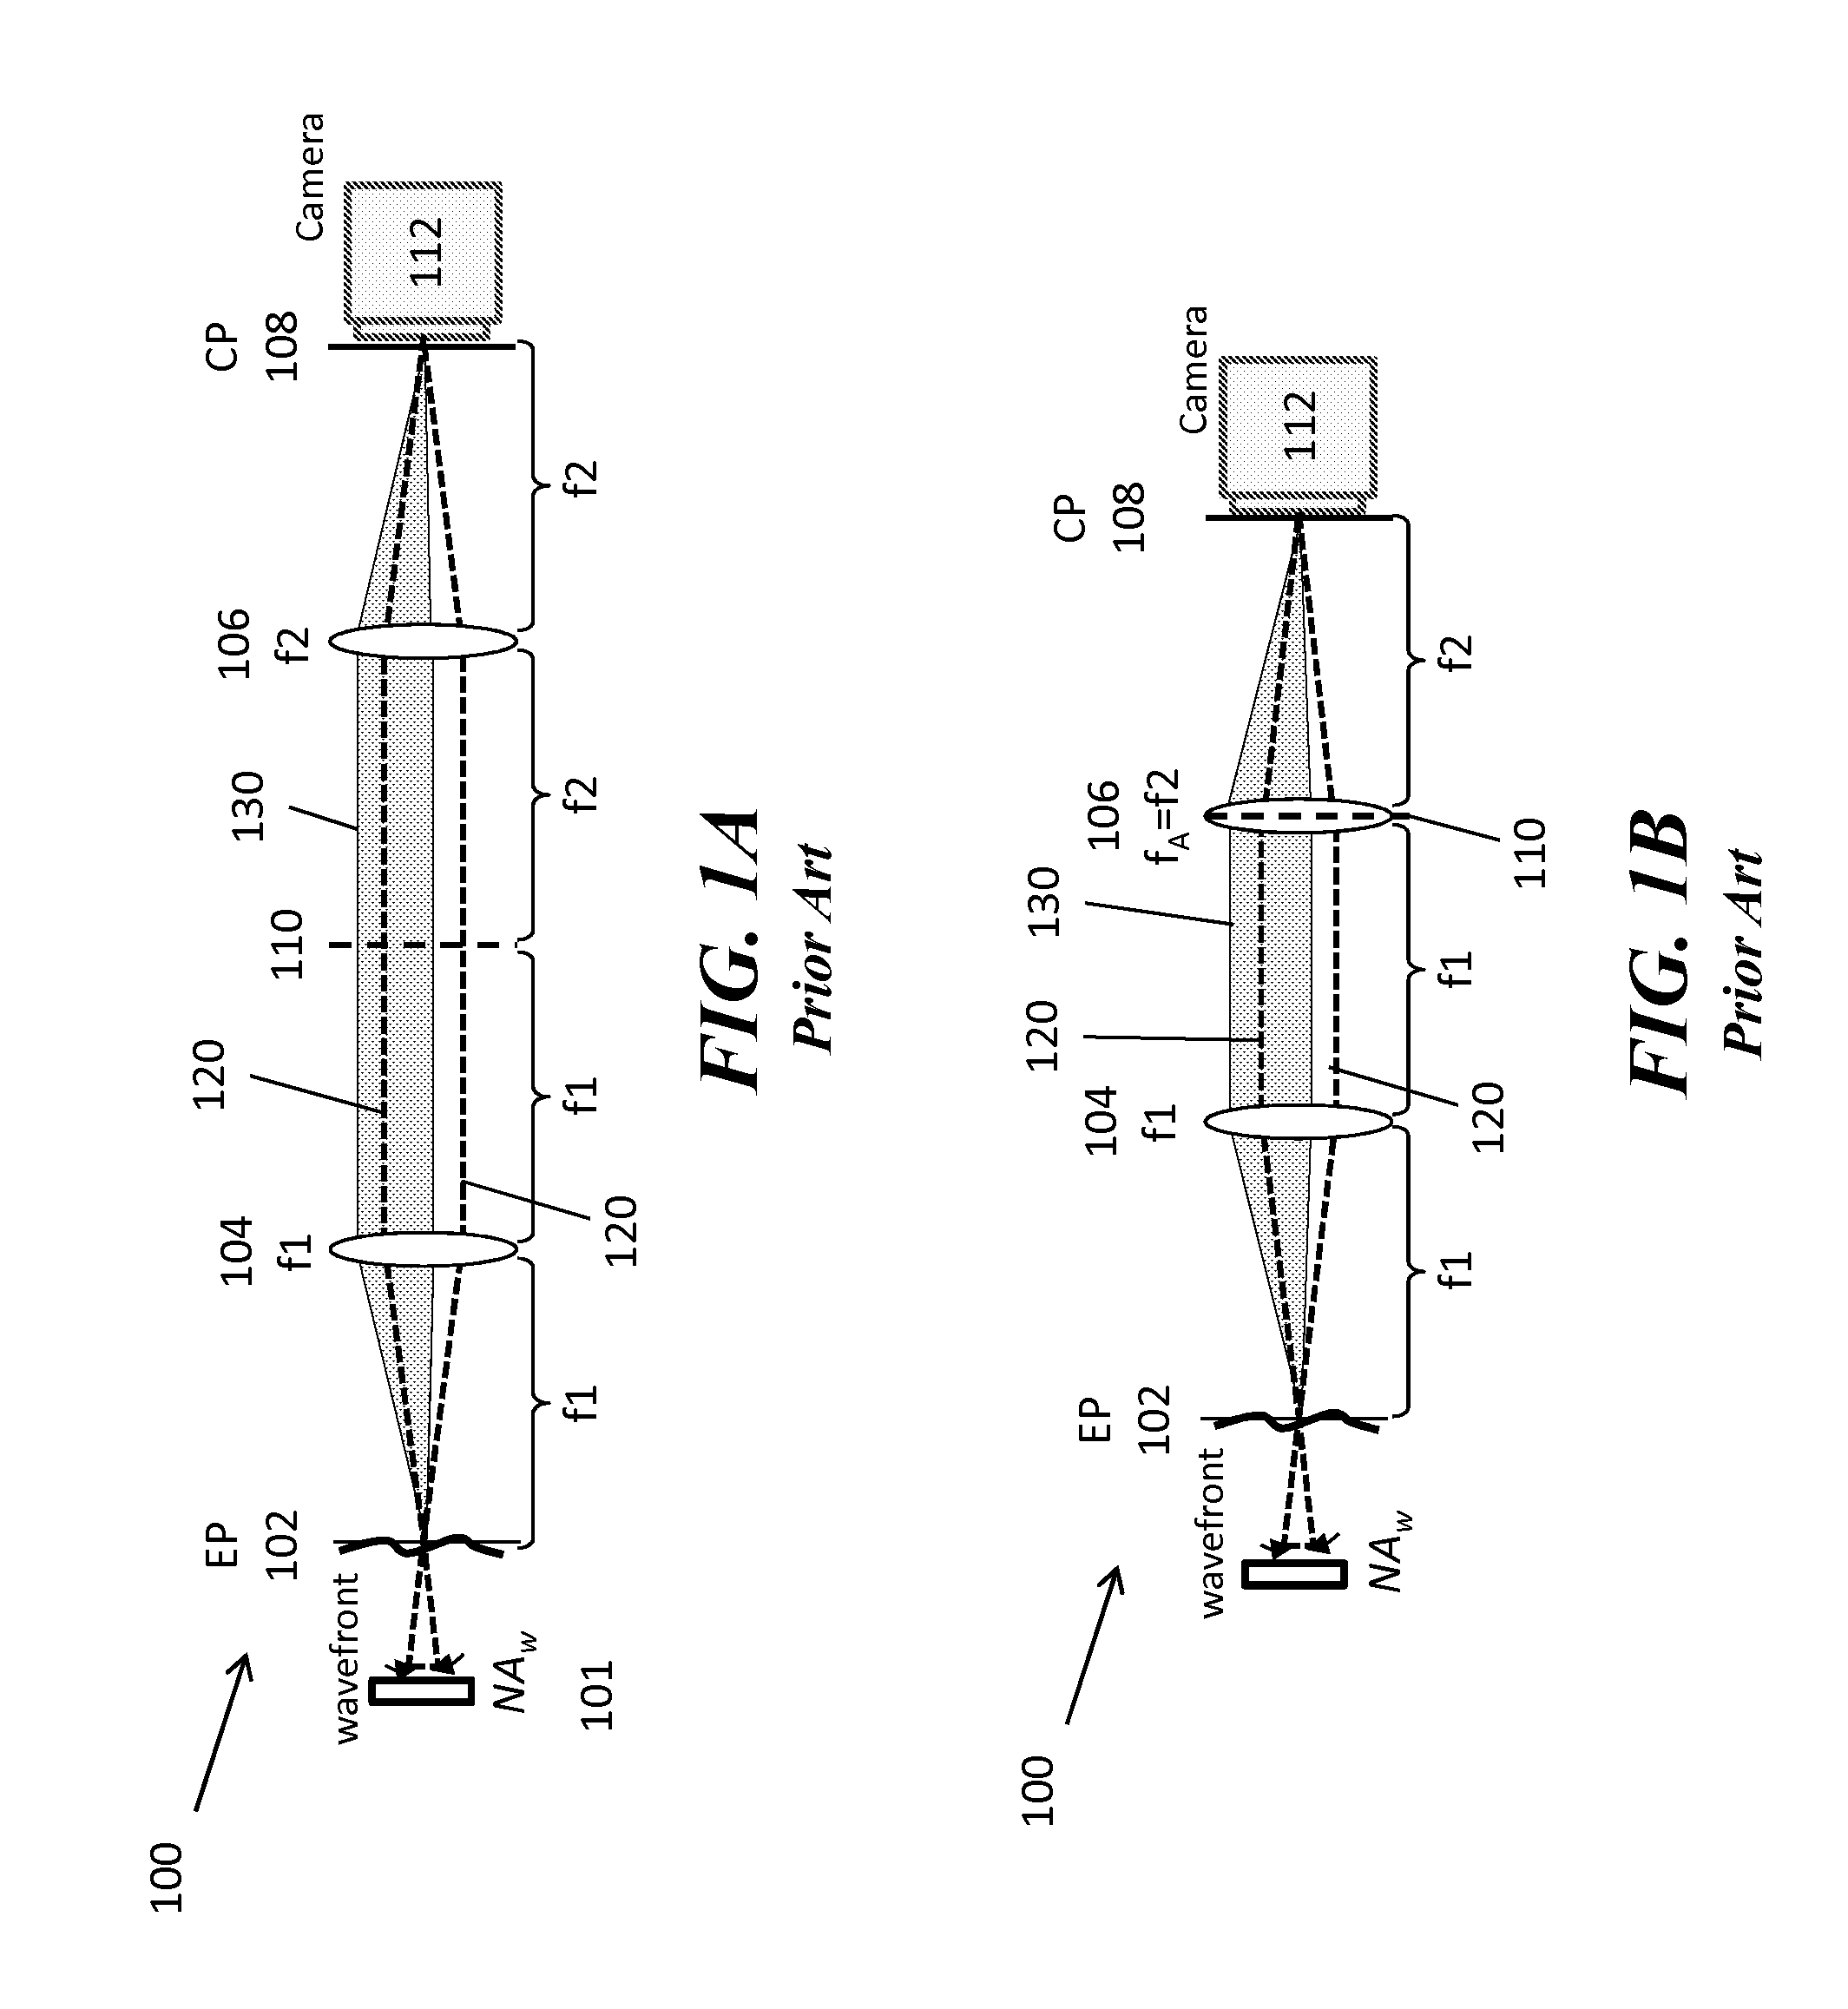 Partitioned aperture wavefront imaging method and system